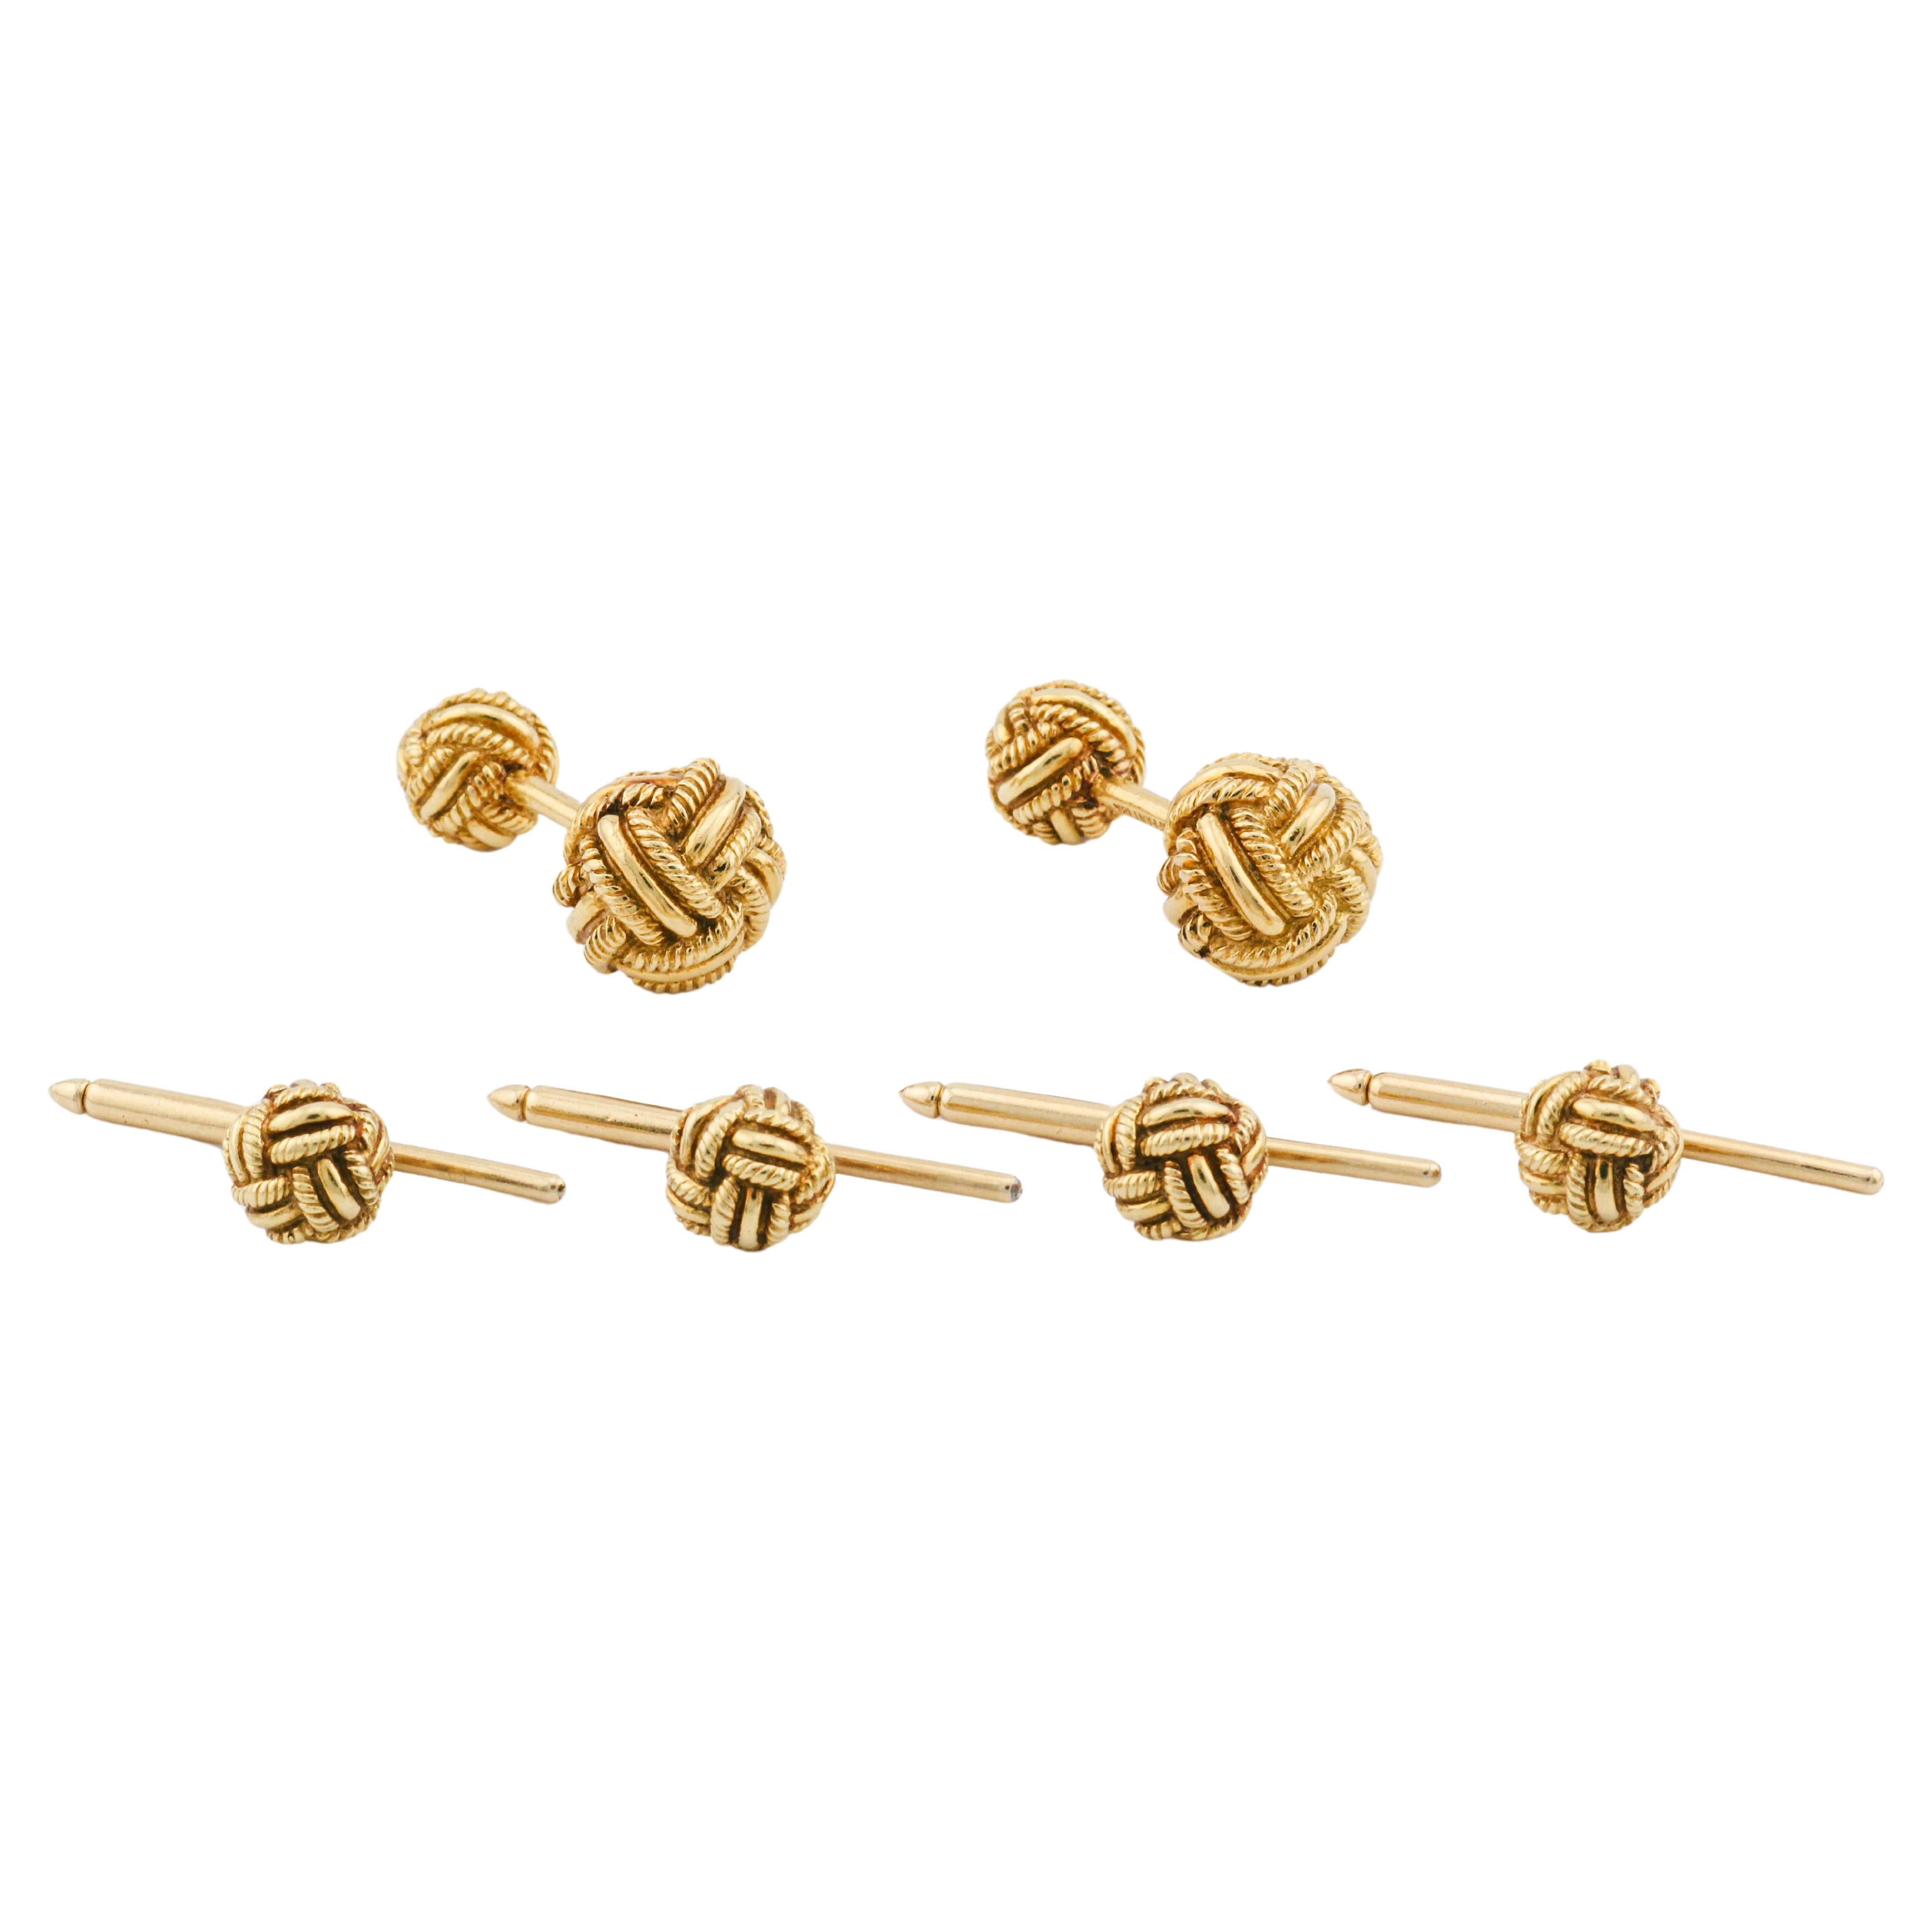 Tiffany & Co. Schlumberger 18K Yellow Gold Rope Knot Cufflinks and 4 Studs Set